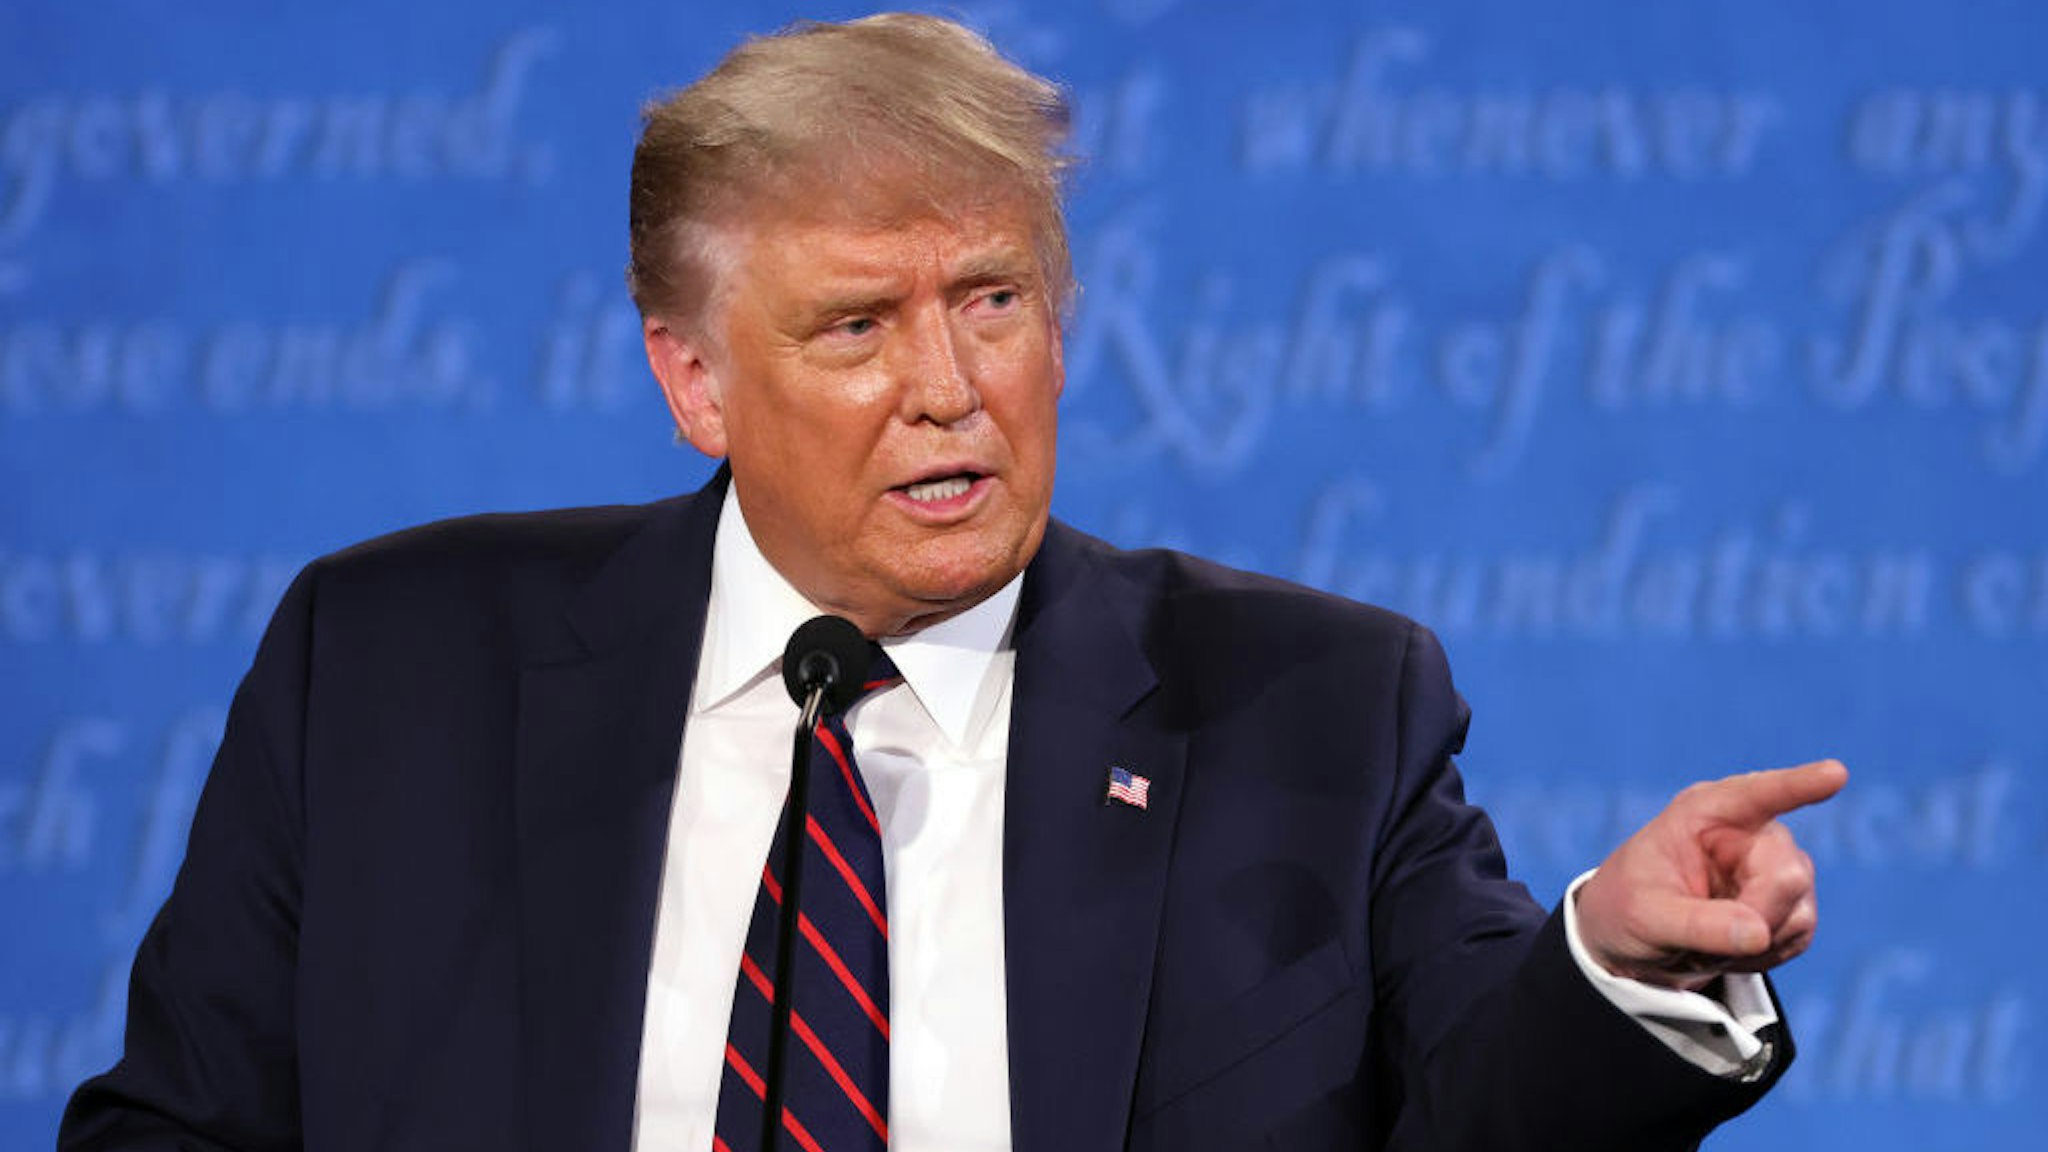 CLEVELAND, OHIO - SEPTEMBER 29: U.S. President Donald Trump participates in the first presidential debate against Democratic presidential nominee Joe Biden at the Health Education Campus of Case Western Reserve University on September 29, 2020 in Cleveland, Ohio. This is the first of three planned debates between the two candidates in the lead up to the election on November 3. (Photo by Win McNamee/Getty Images)